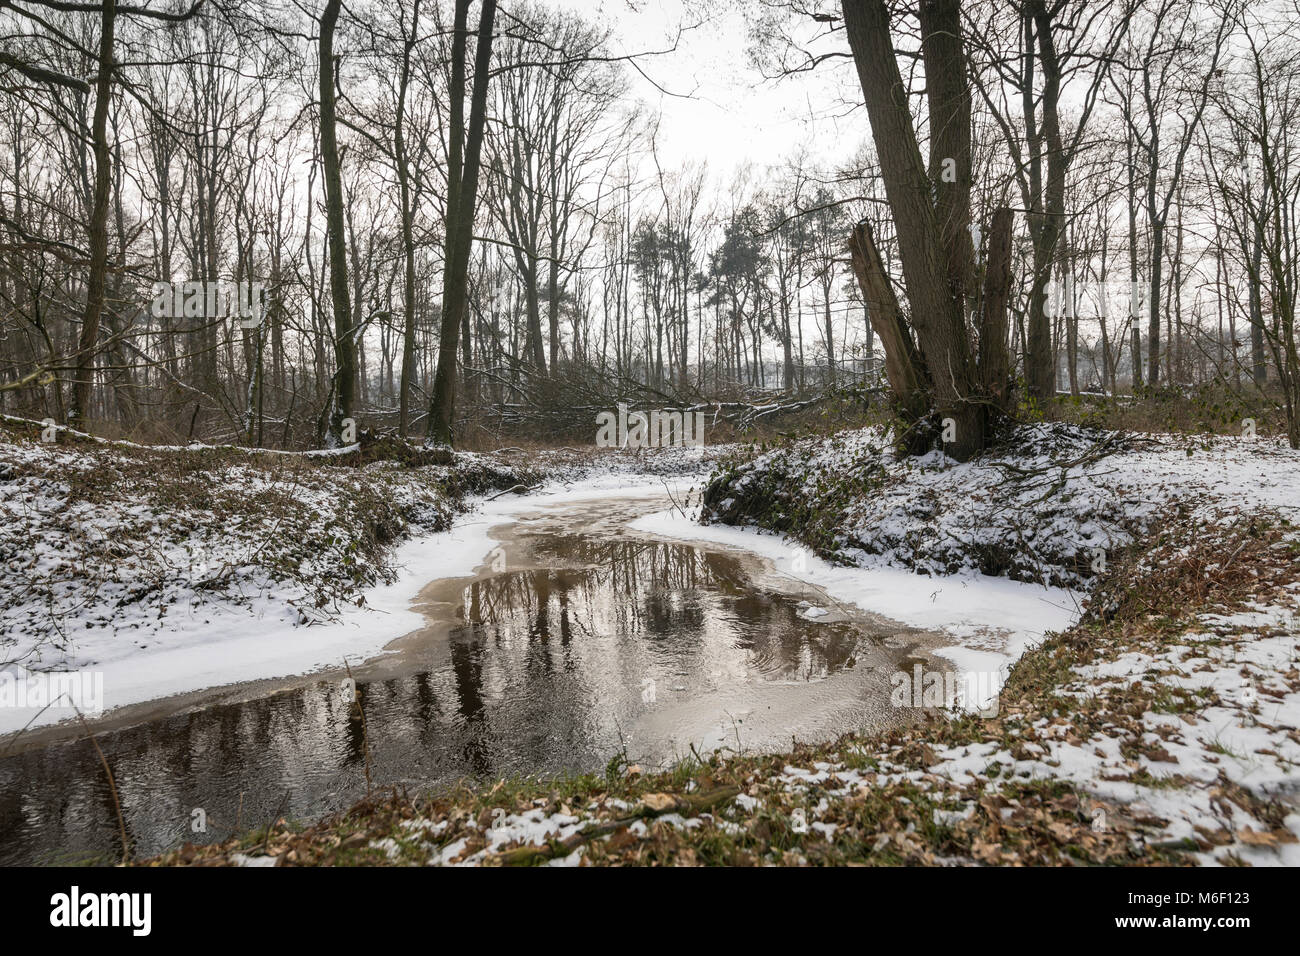 Meandering river in winter landscape with snow and ice in a forest, Netherlands Stock Photo